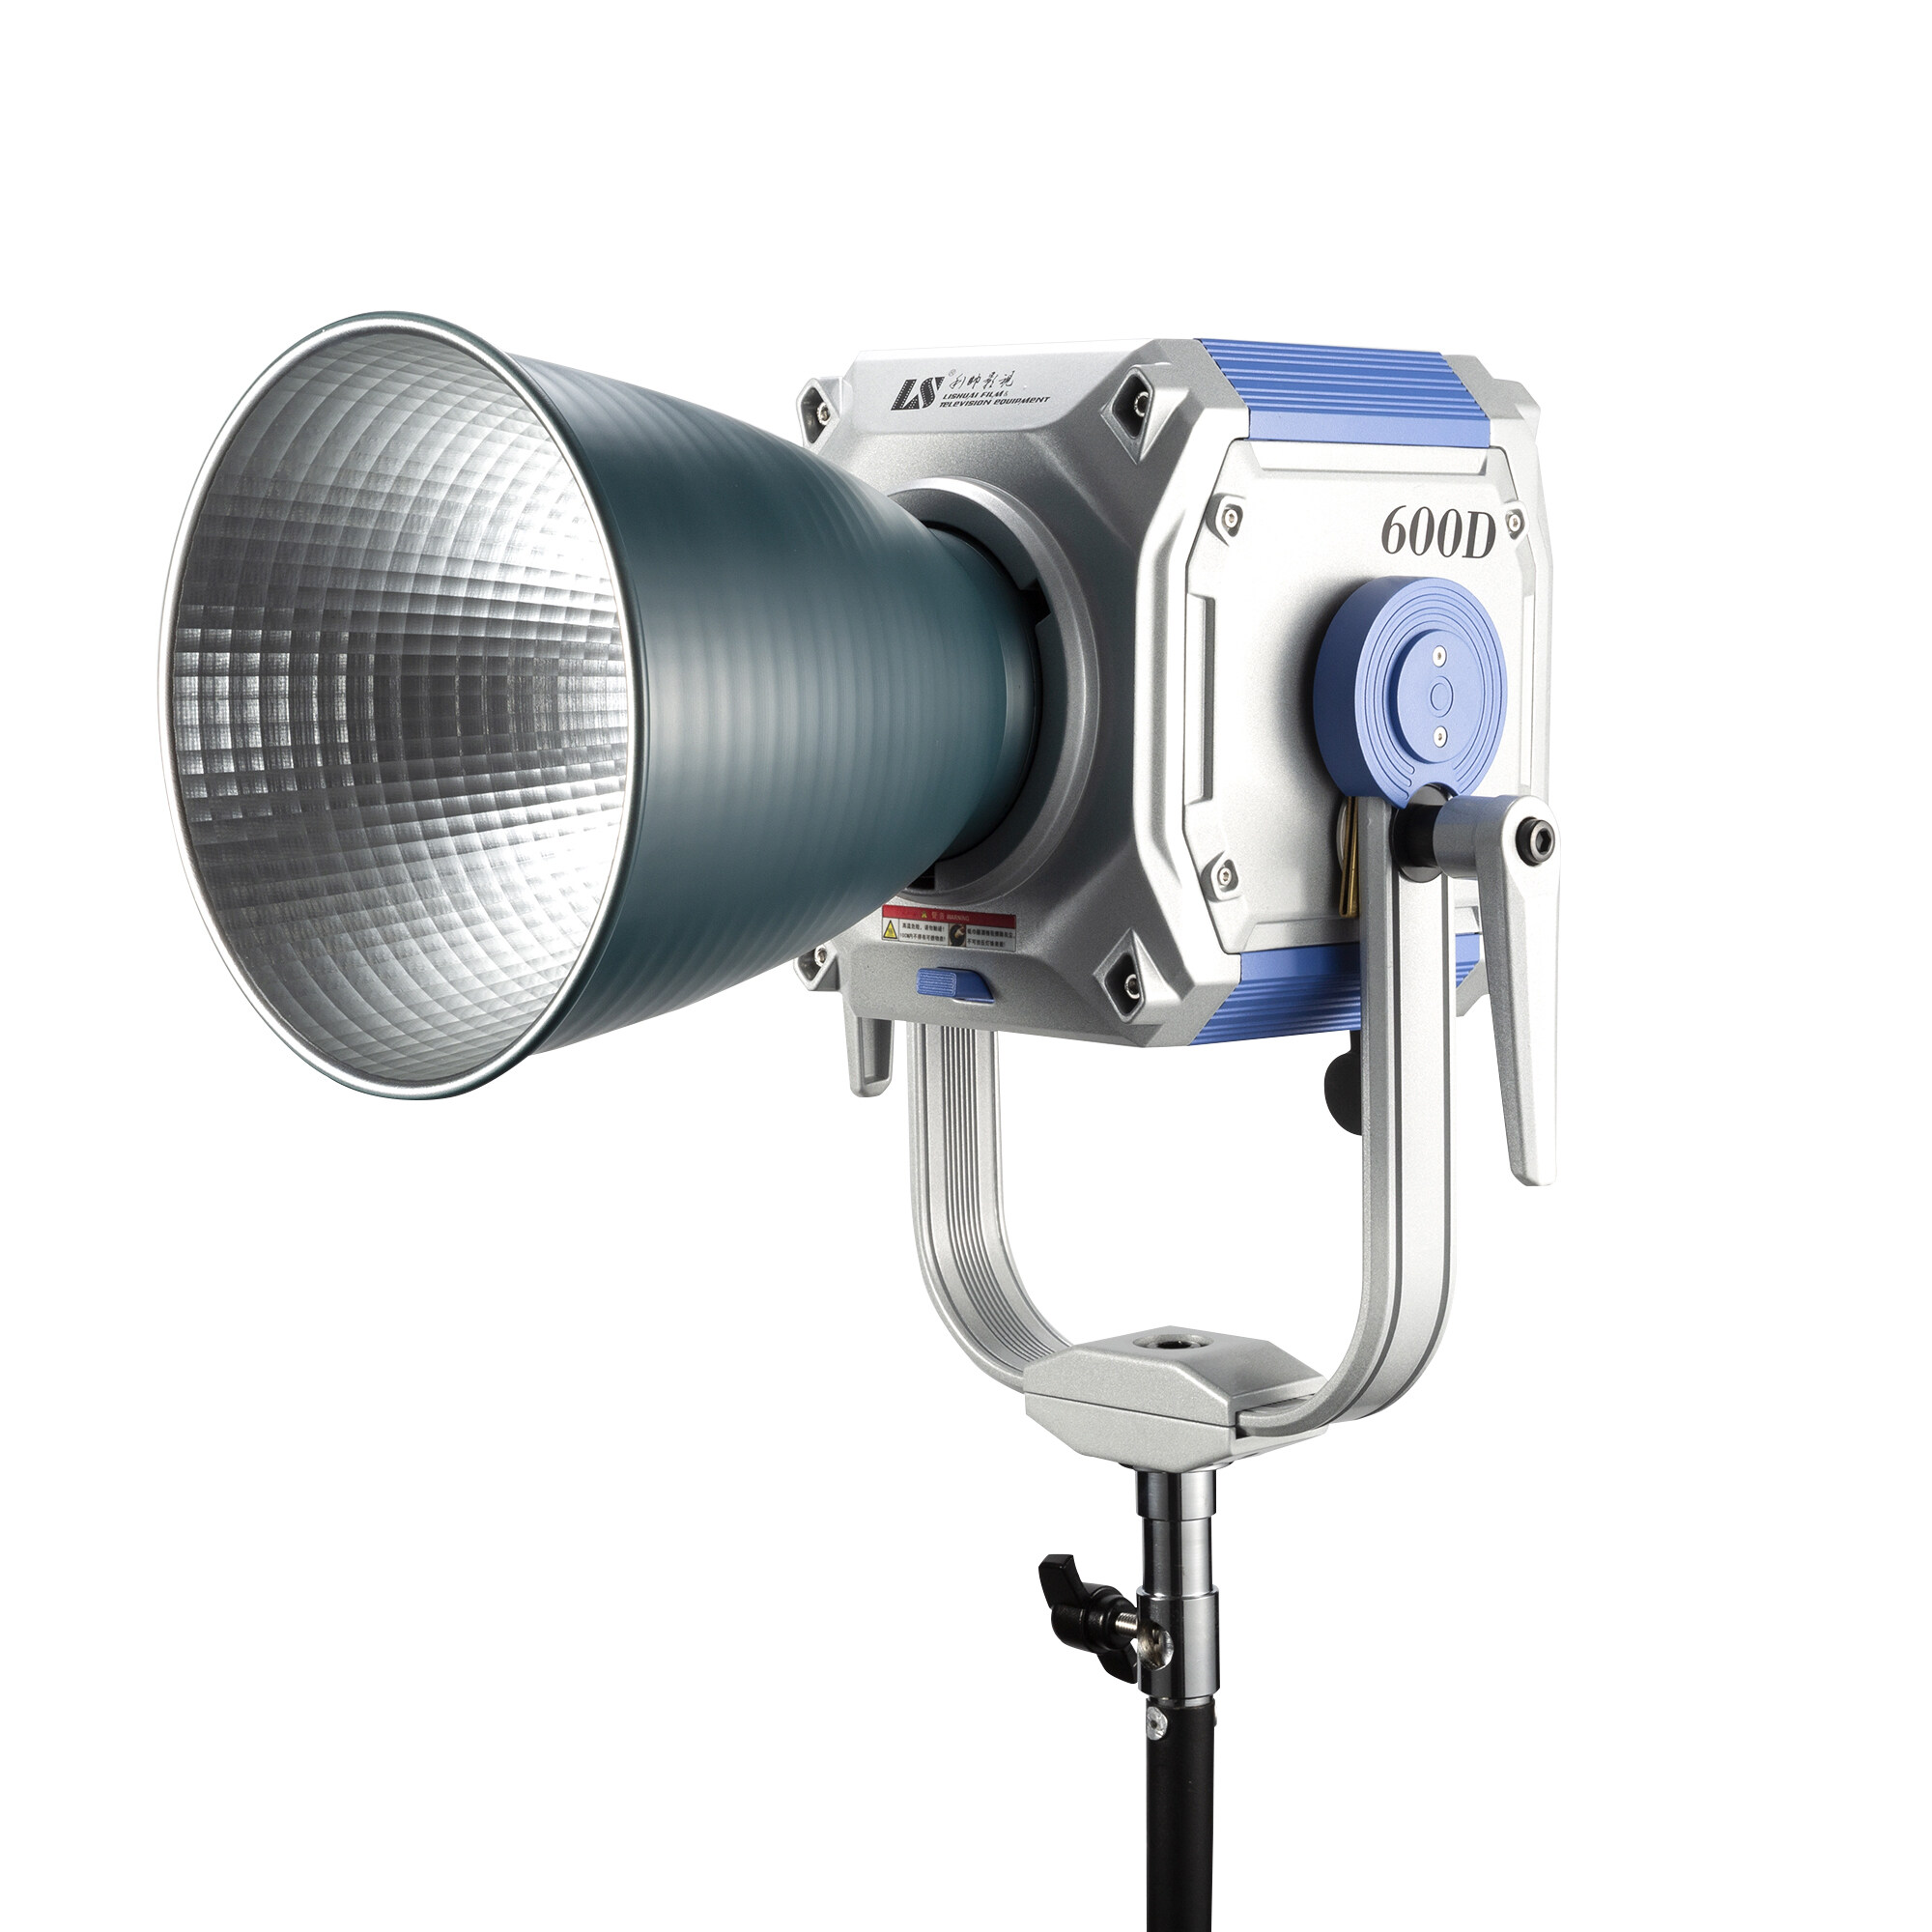 600W LS FOCUS 600D Daylight LED Monolight with High Brightness for Studio and Video Lighting